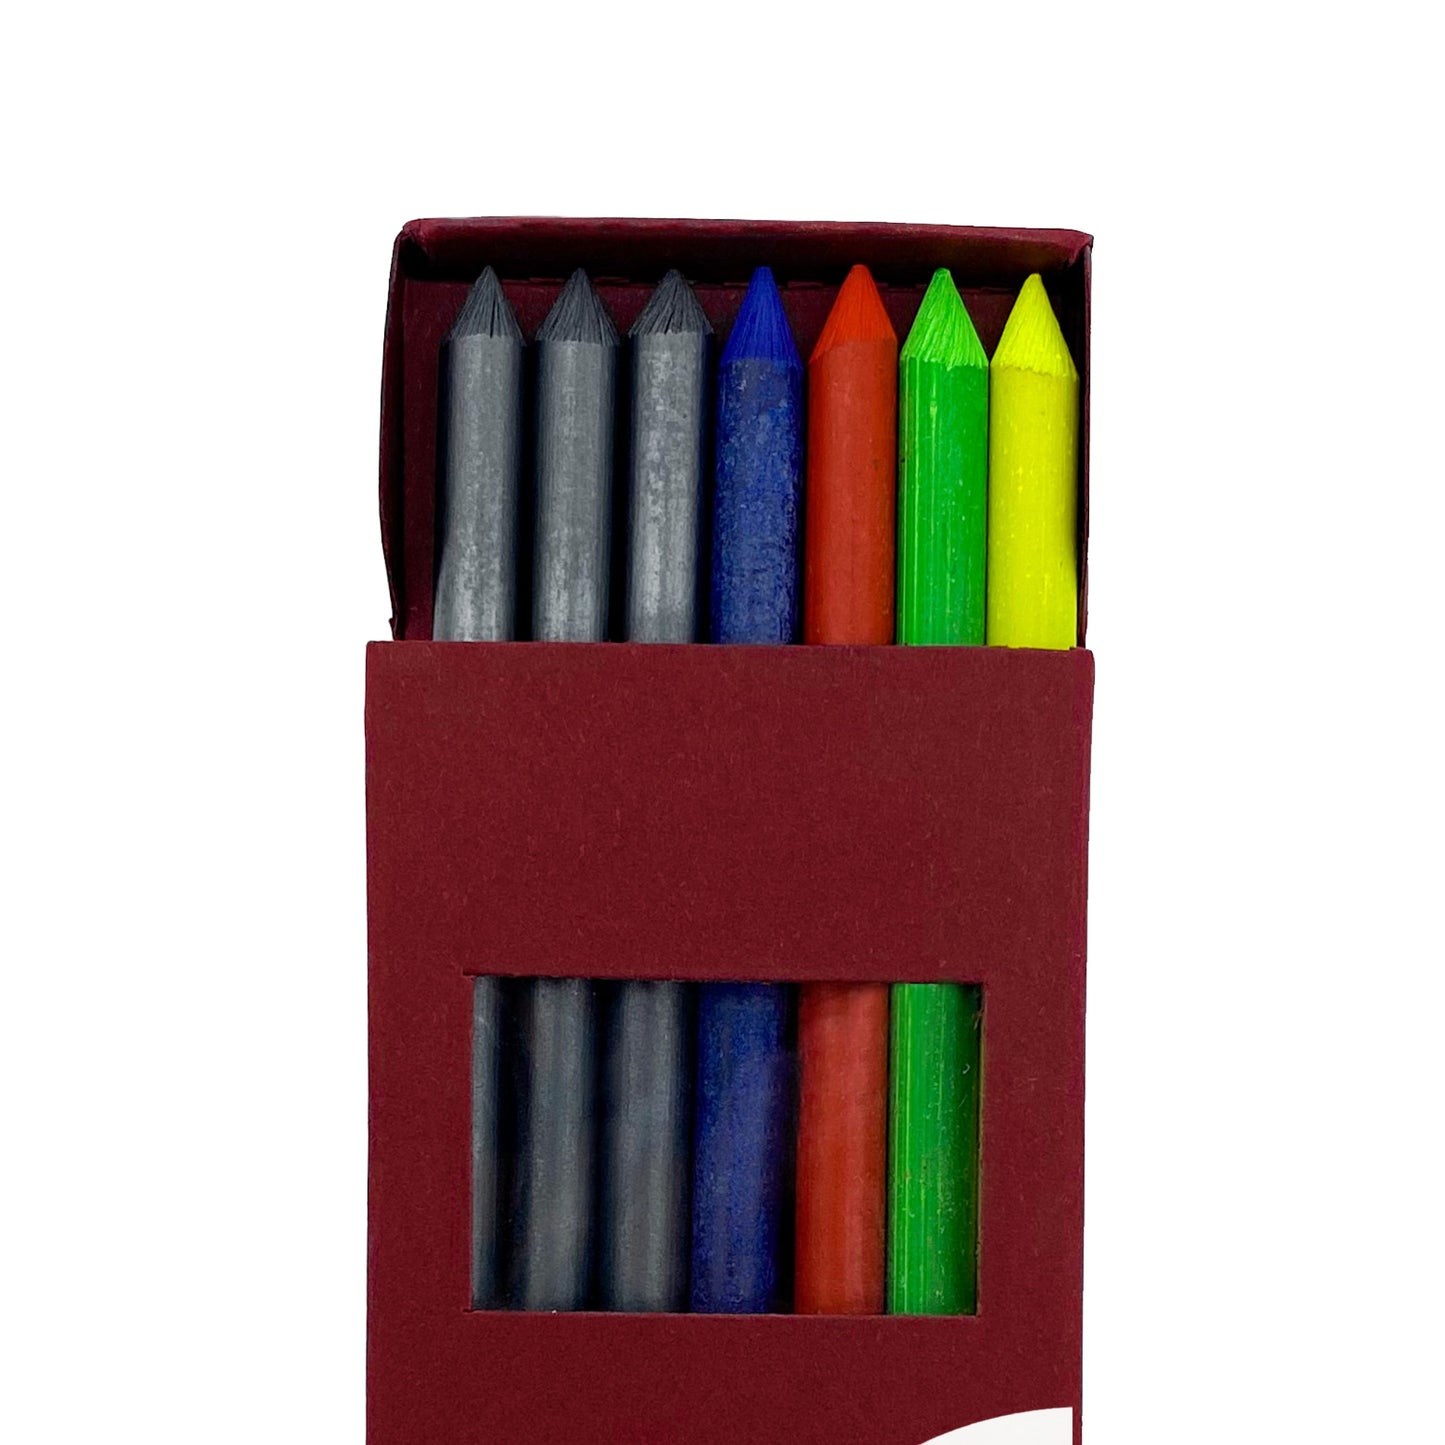 EGO.M - Achille Castiglione - CENTO3 - multifunction art pencil - refill wax crayons & highlighters